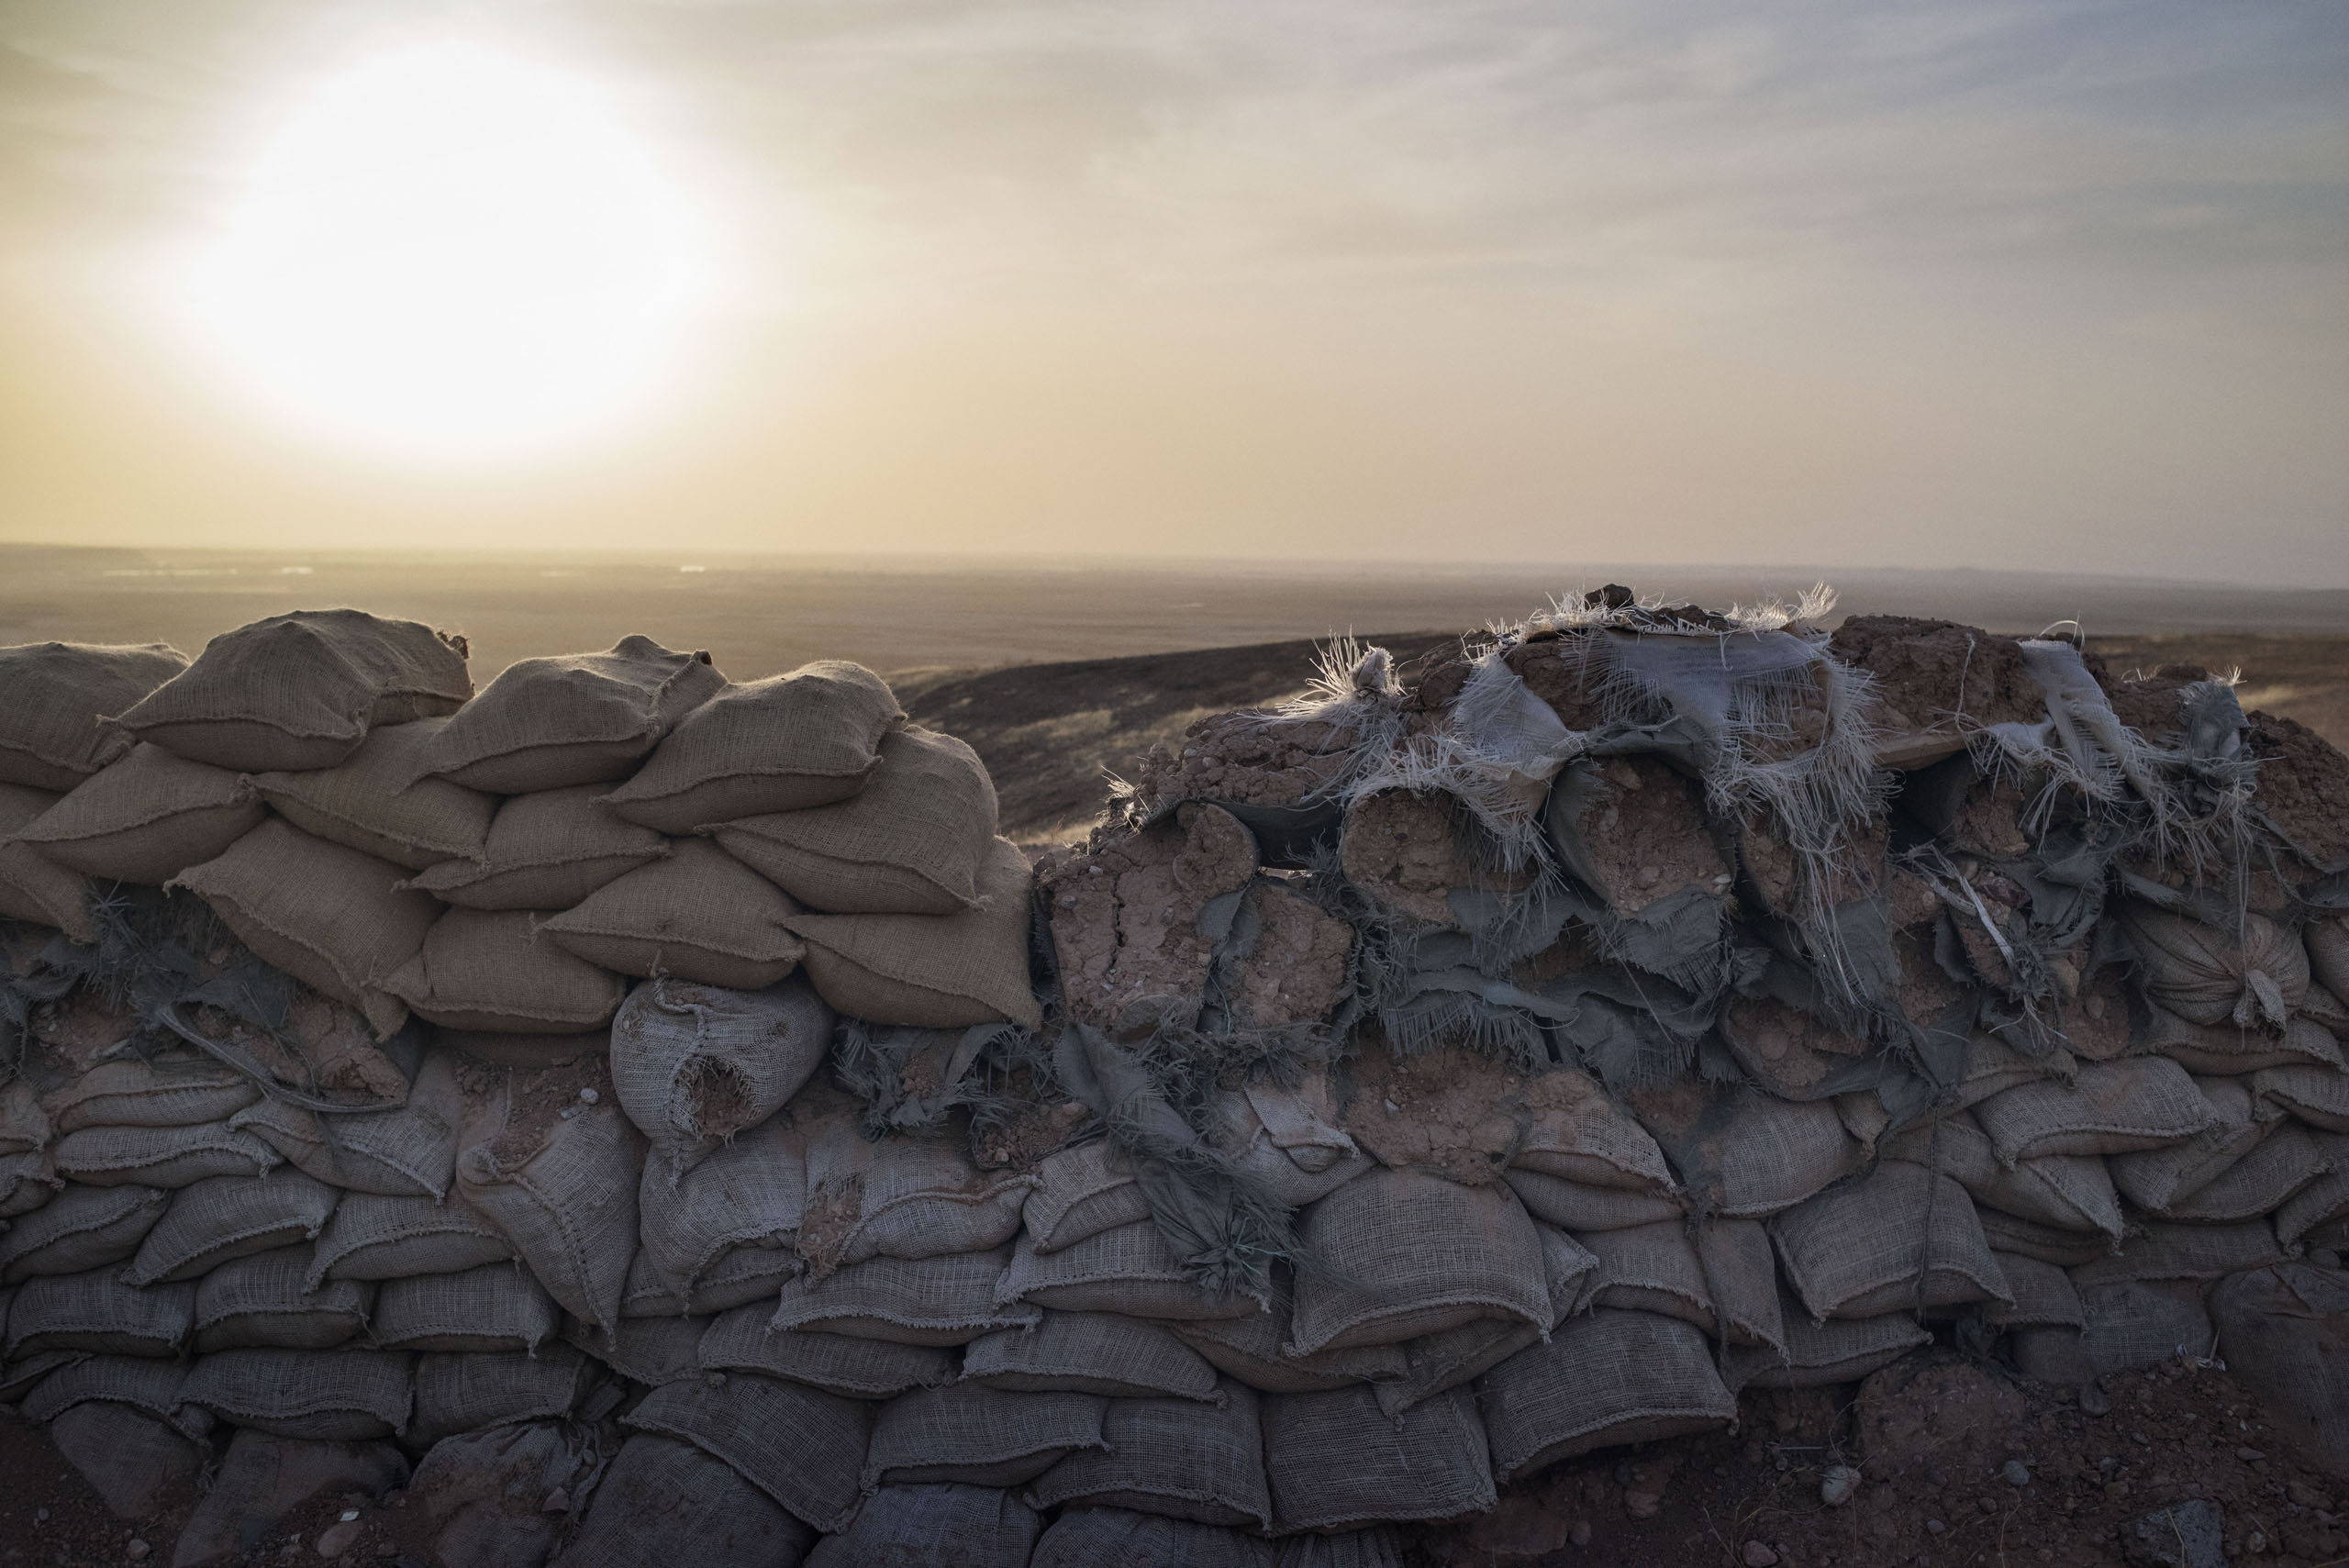 The front line near the village of Sultan Abdullah, northern Iraq, May 15, 2016. Kurdish forces are  defending their lines against ISIS in northern Iraq, rather than actively pushing into ISIS held territory.